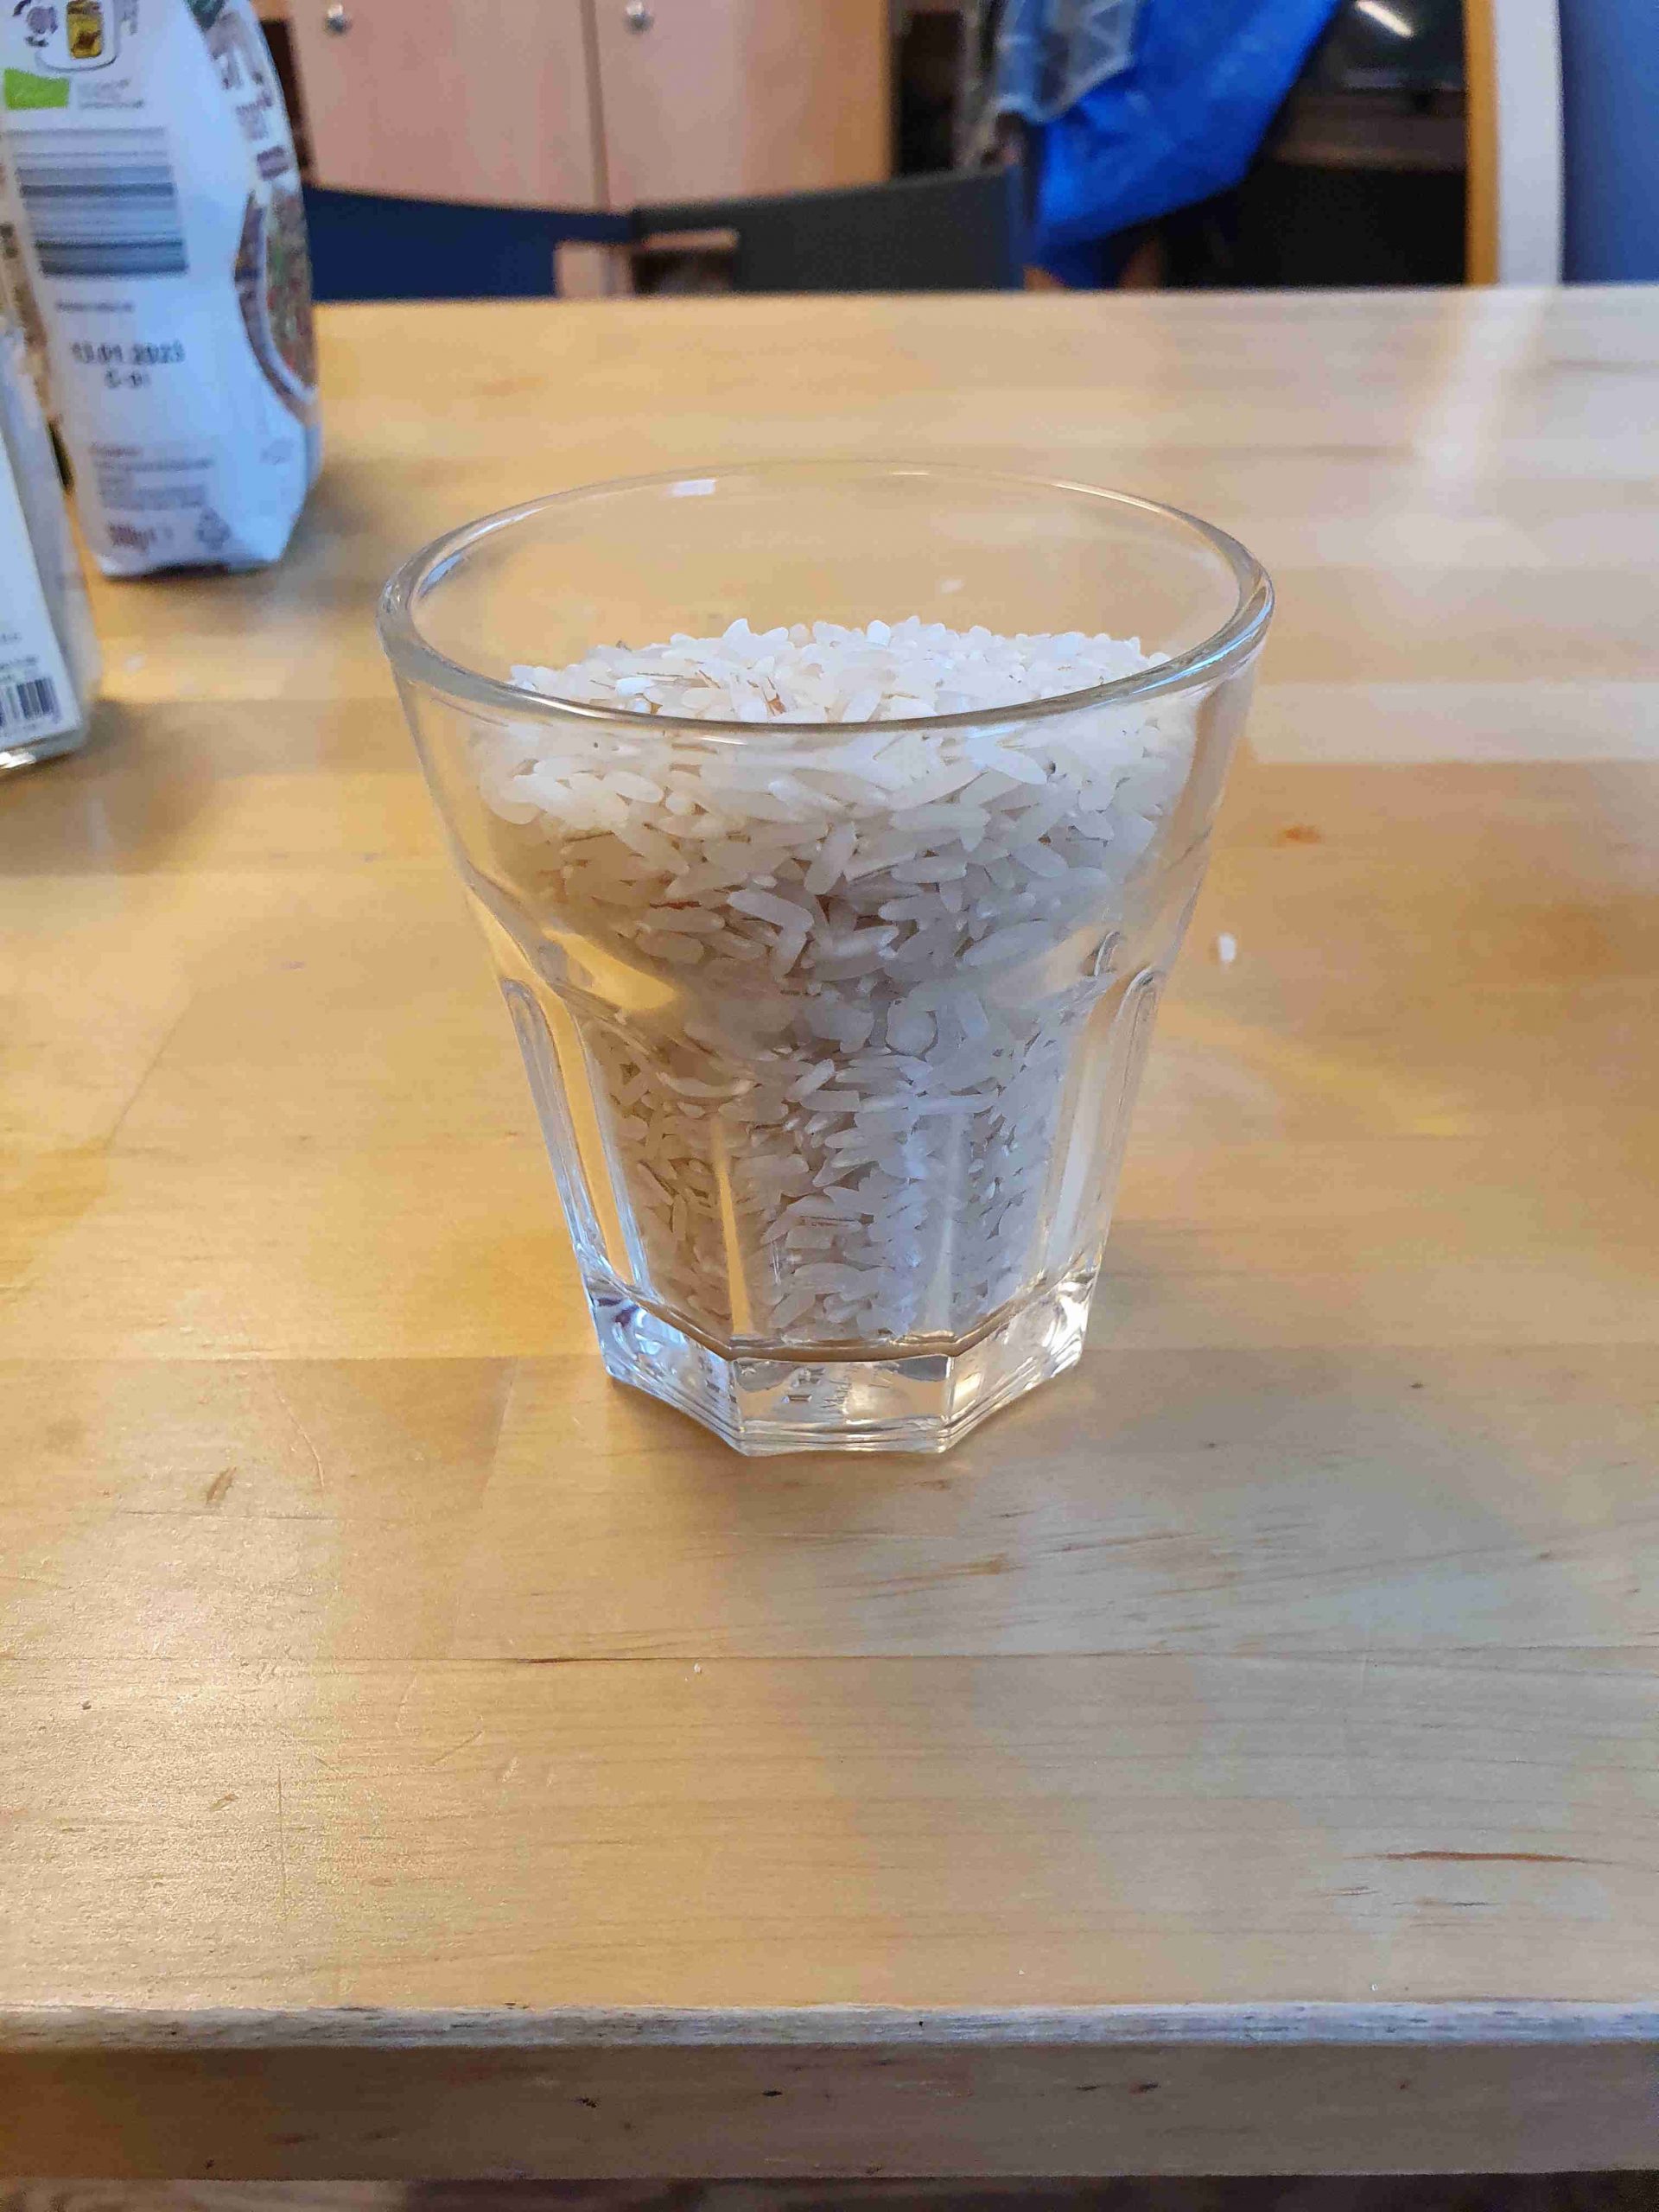 1 Cup of Rice